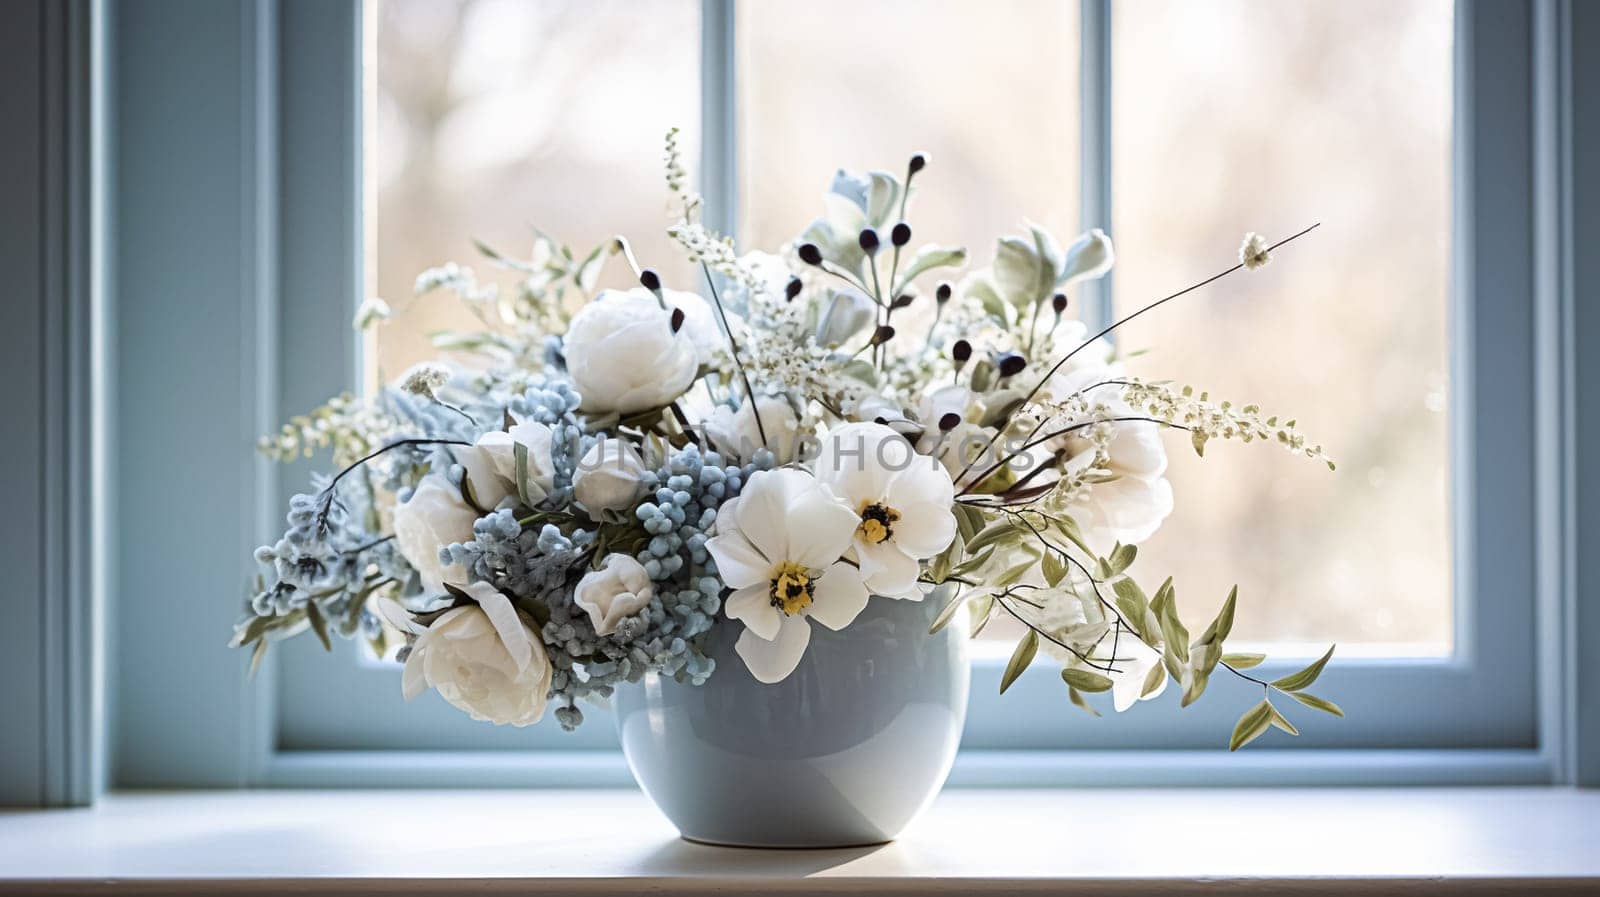 Floral arrangement with winter, autumn or early spring botanical plants and flowers by Anneleven